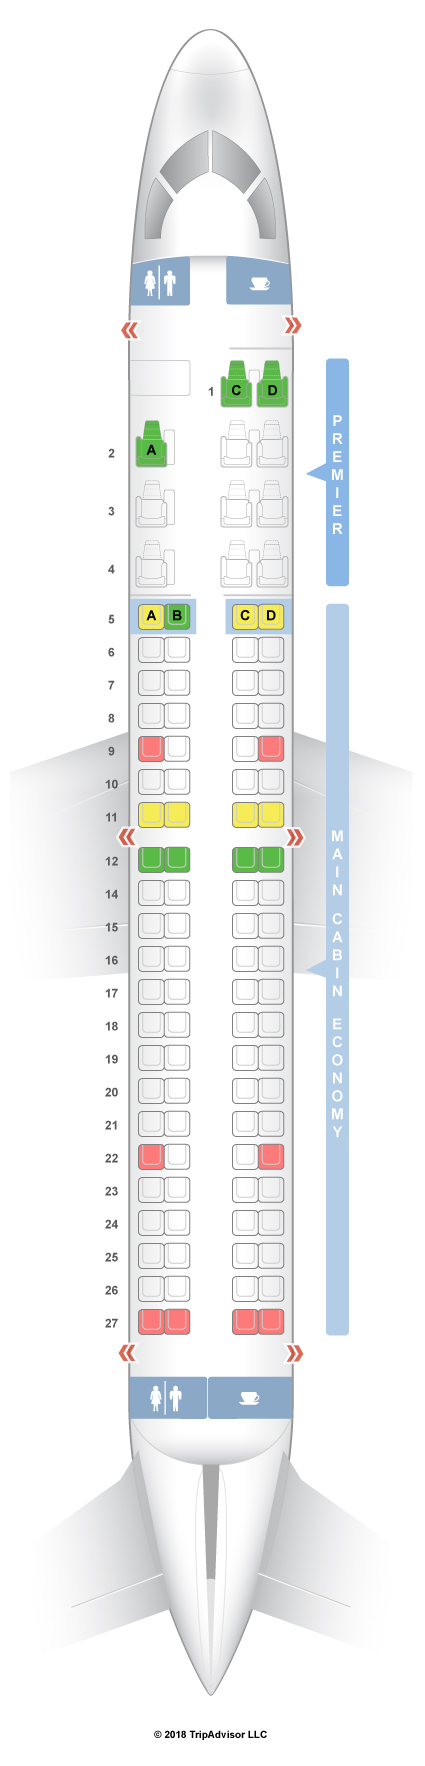 Embraer E190 Seating Chart